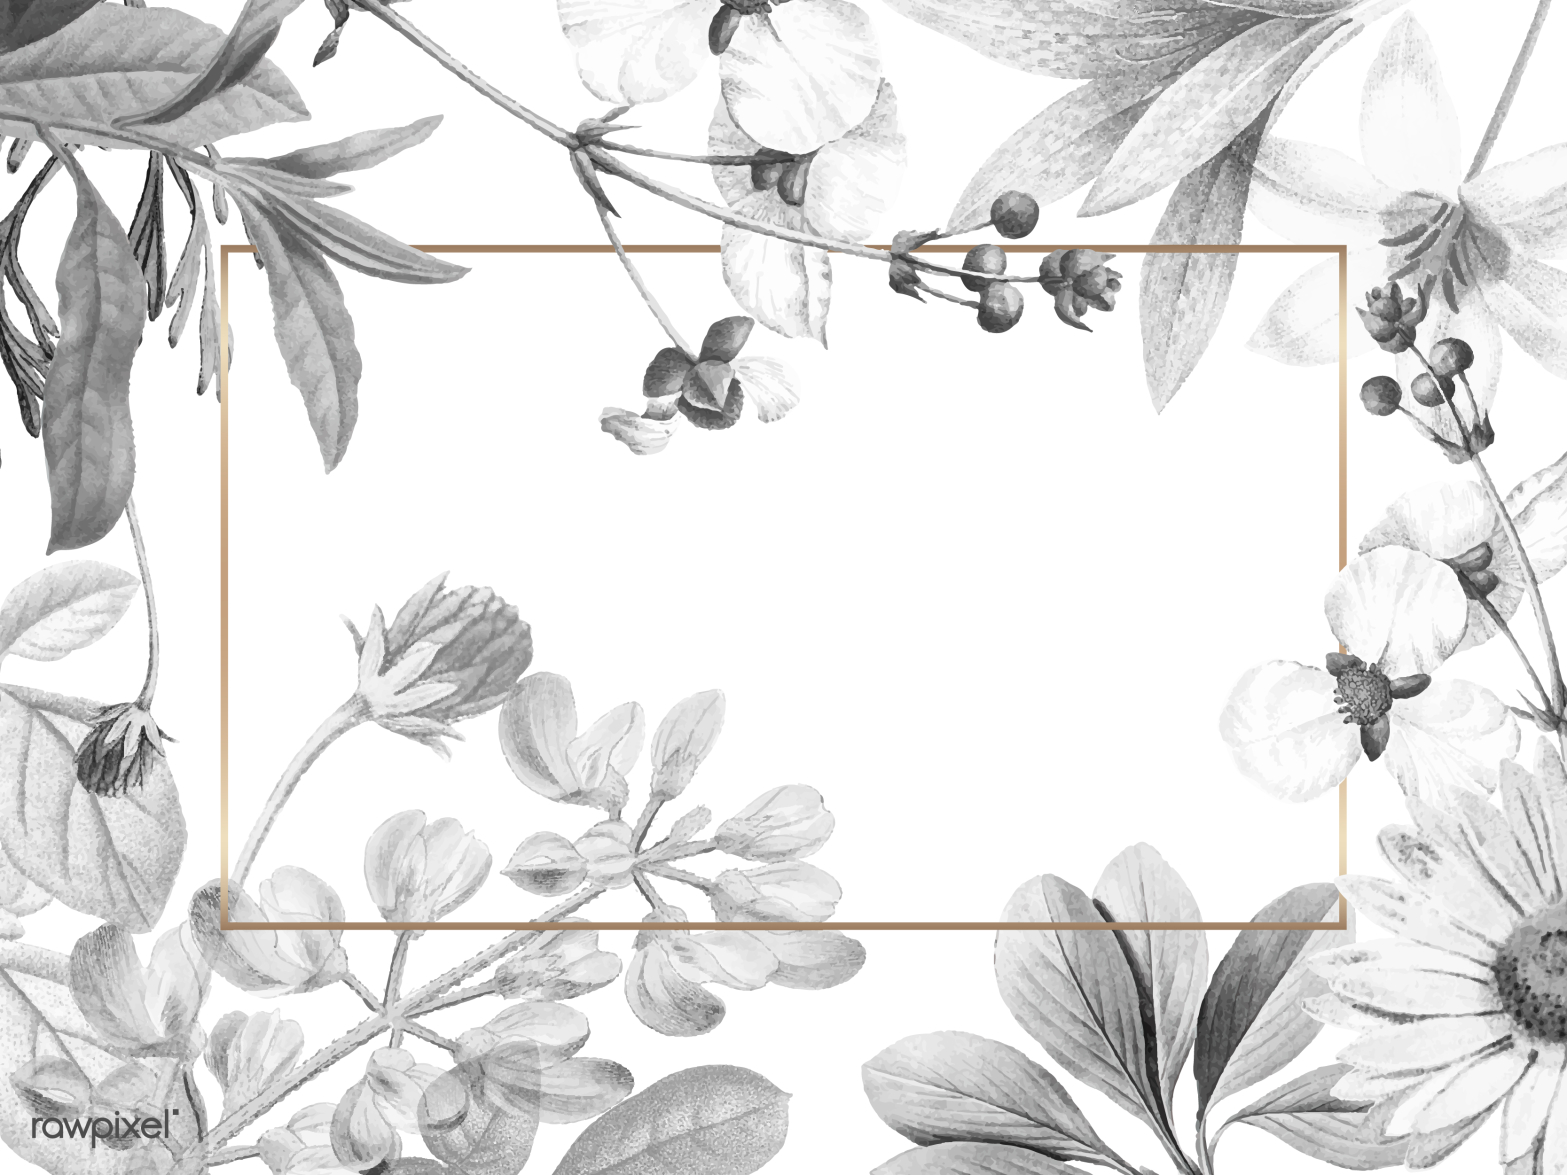 Blank floral frame design by Sasi for rawpixel on Dribbble